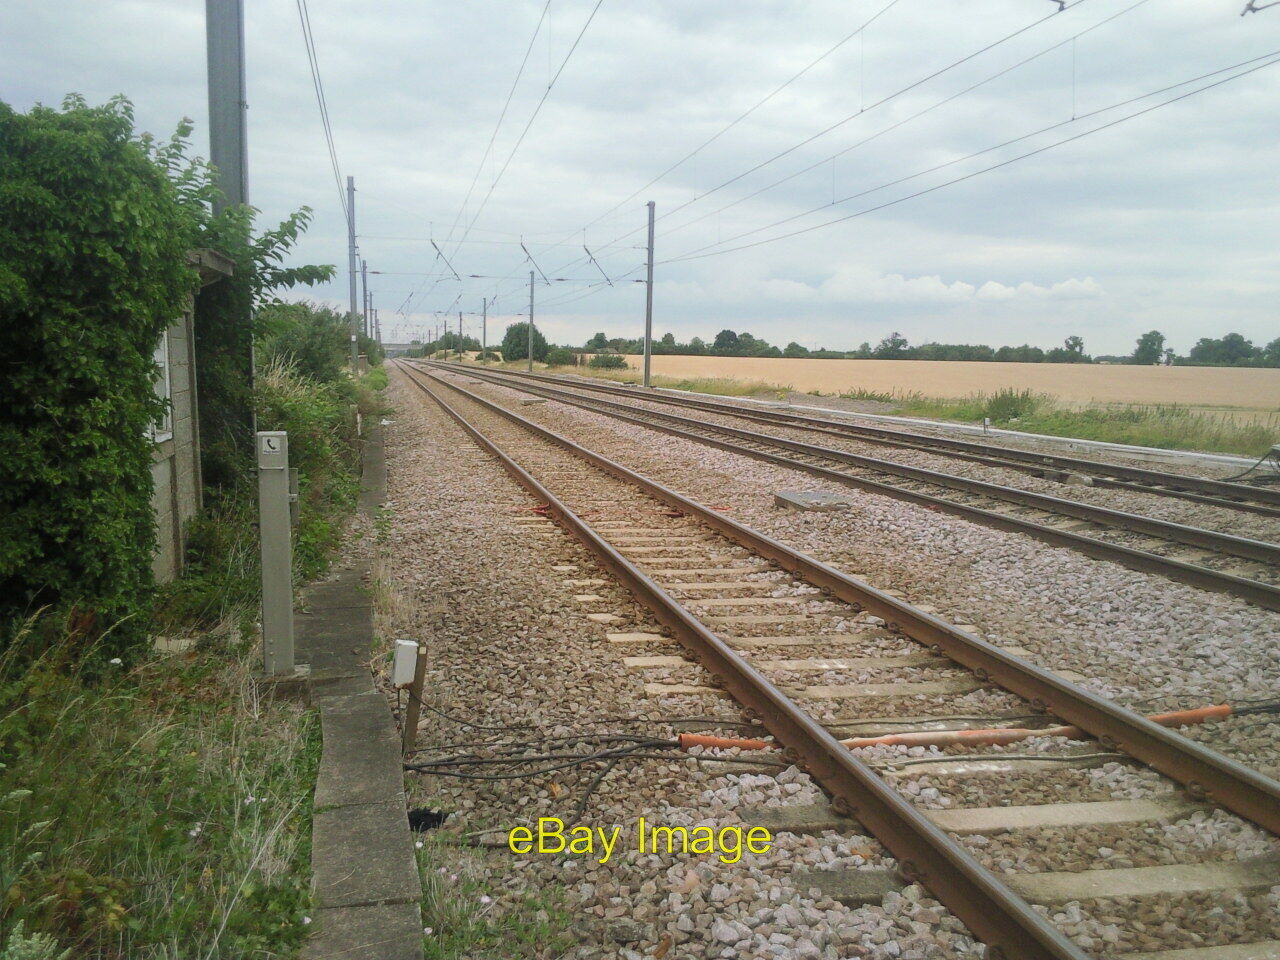 Photo 6x4 The track side at Abbotts Ripton The photograph illustrates how c2010